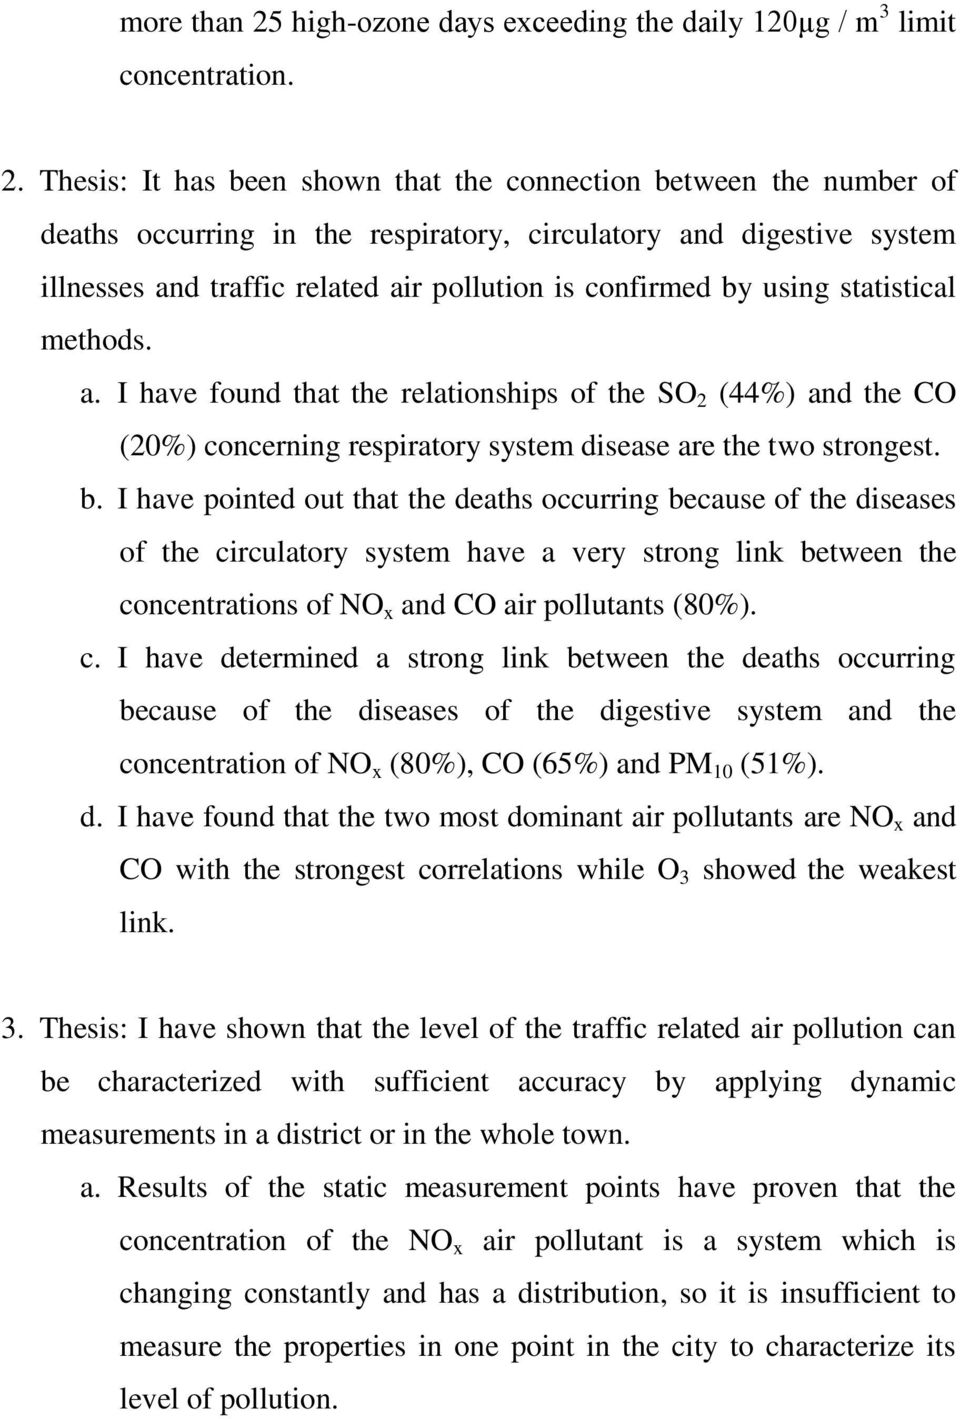 Thesis: It has been shown that the connection between the number of deaths occurring in the respiratory, circulatory and digestive system illnesses and traffic related air pollution is confirmed by